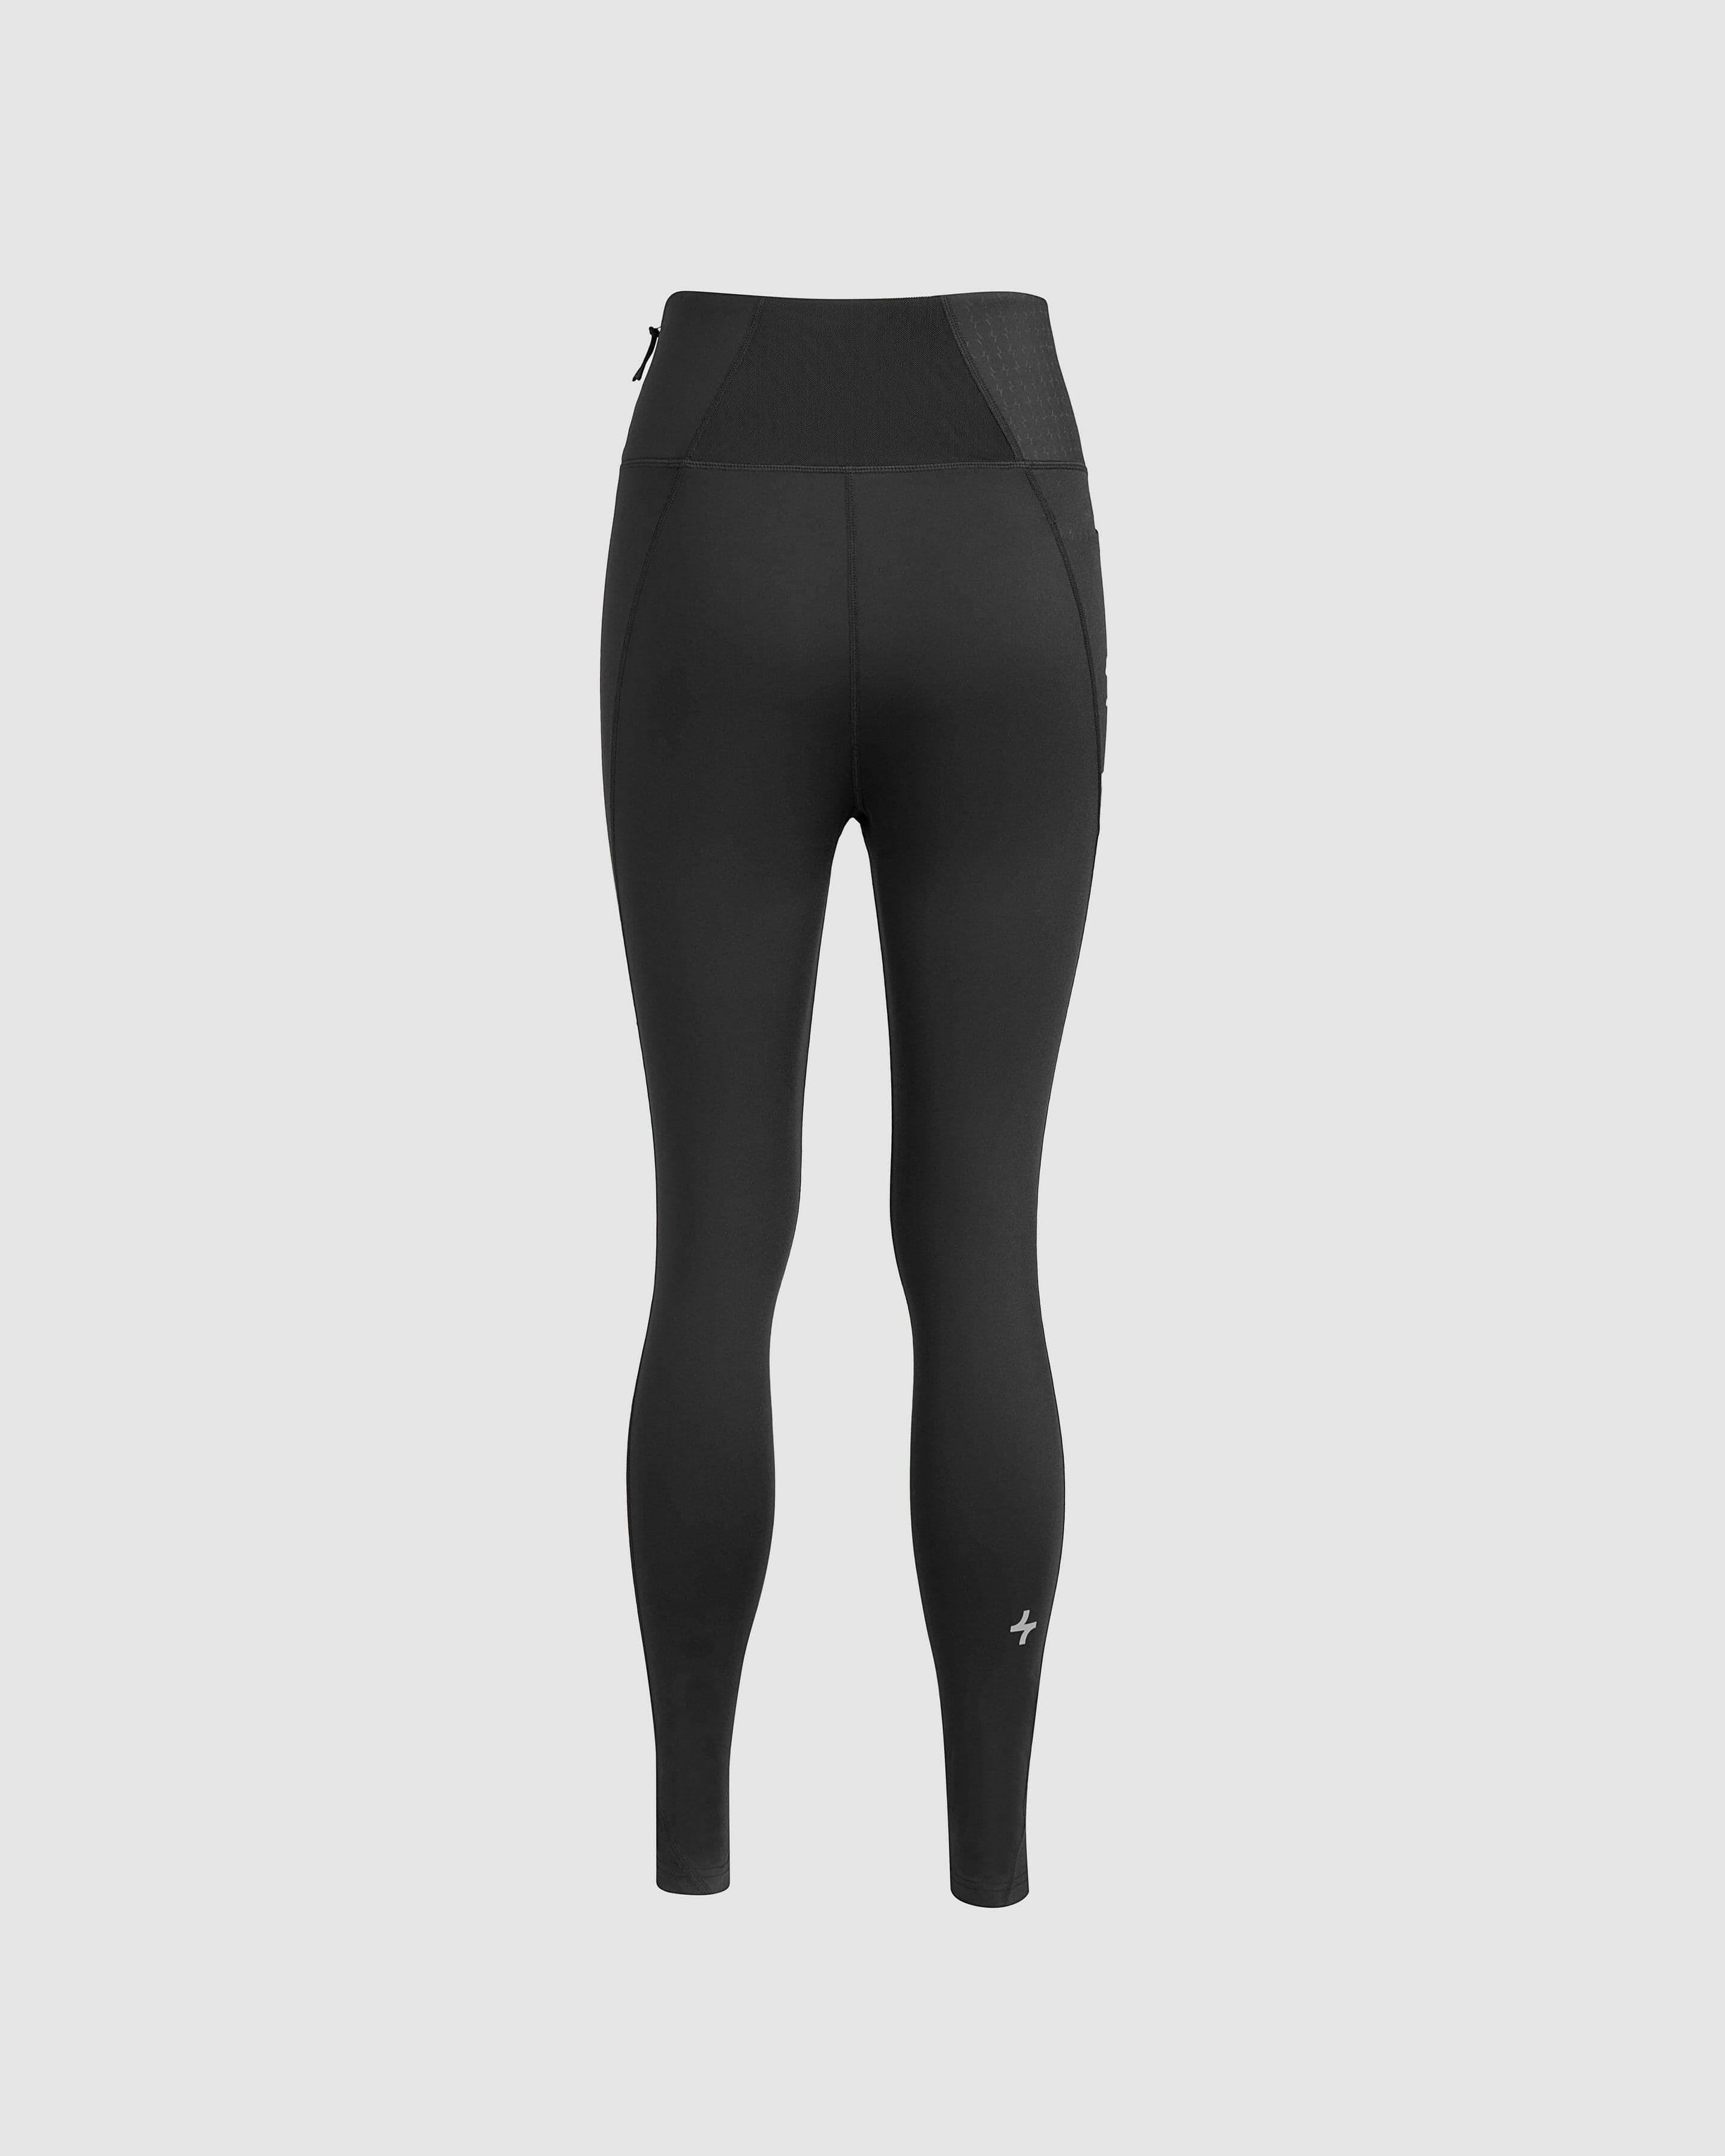 Back side of Stylish Black LADINA LEGGINGS by Qynda with a high waistband and better fitting, zipper detail on white background.